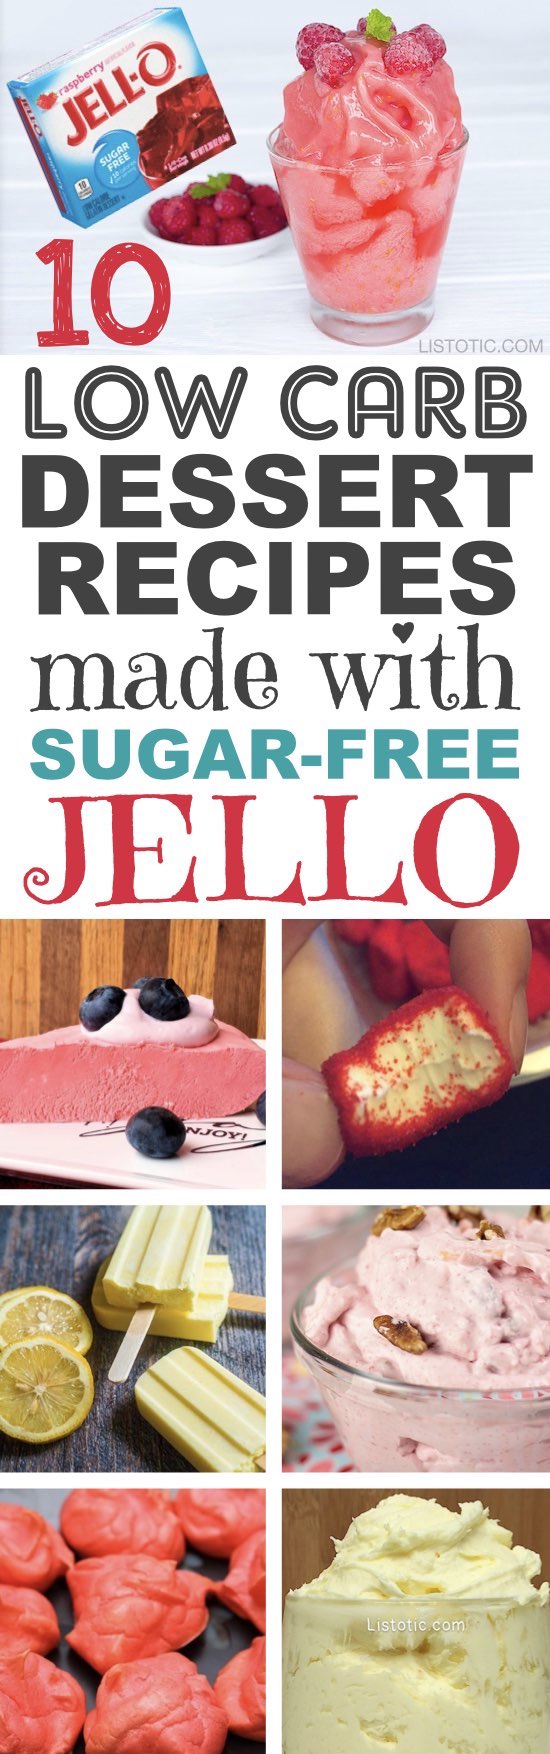 10 Easy, Quick, No-Bake Low Carb Keto Dessert Recipes -- many with just 2 ingredients! All atkins and diabetic friendly. These sugar free Jello treats are sure to please! Listotic.com 